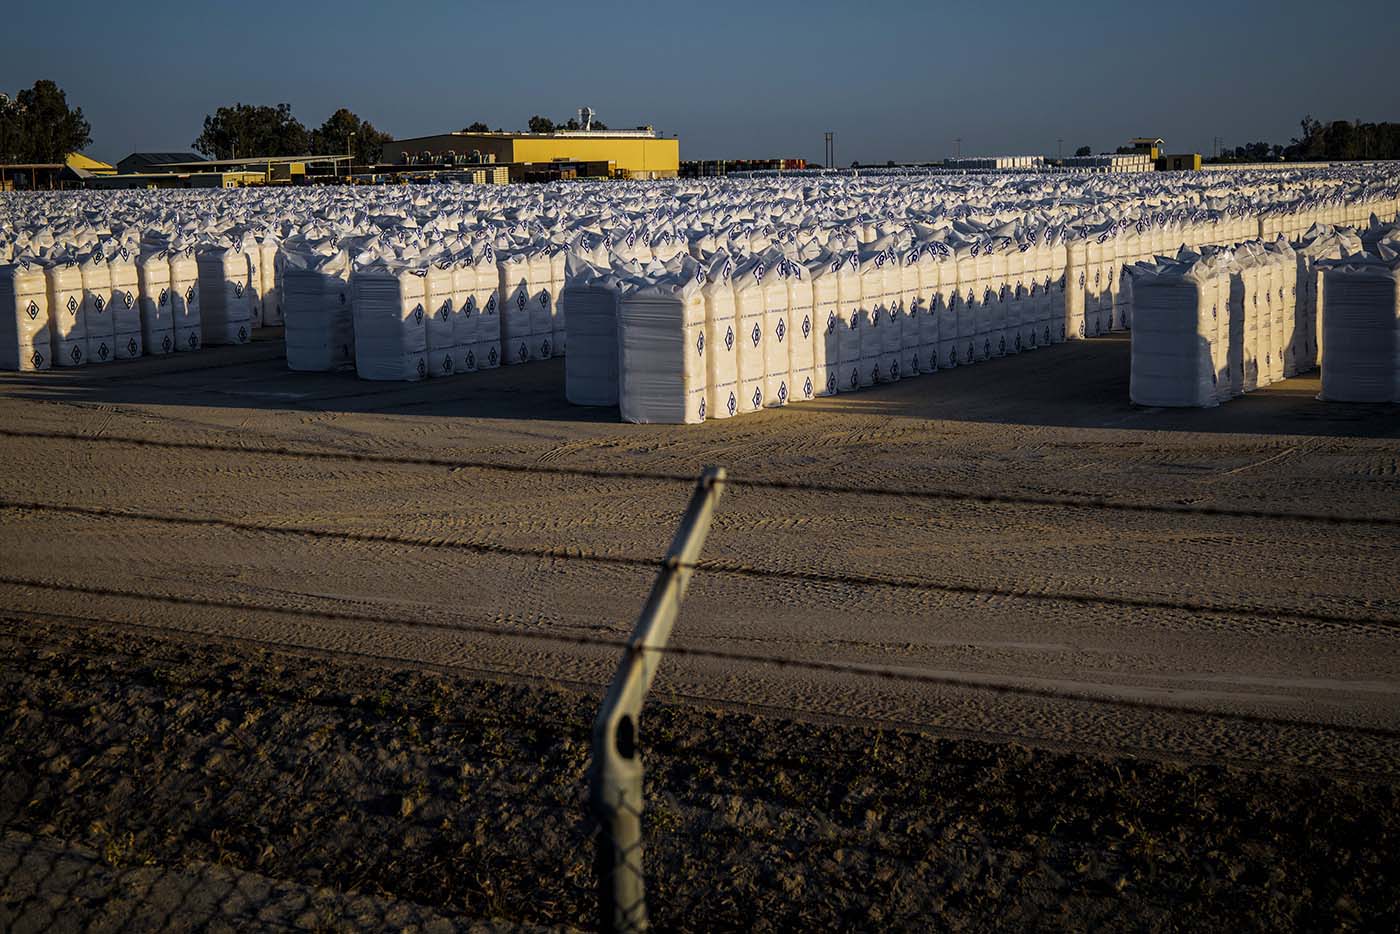 Bales of ginned cotton sit at J. G. Boswell Company’s bale yard in Corcoran, California.